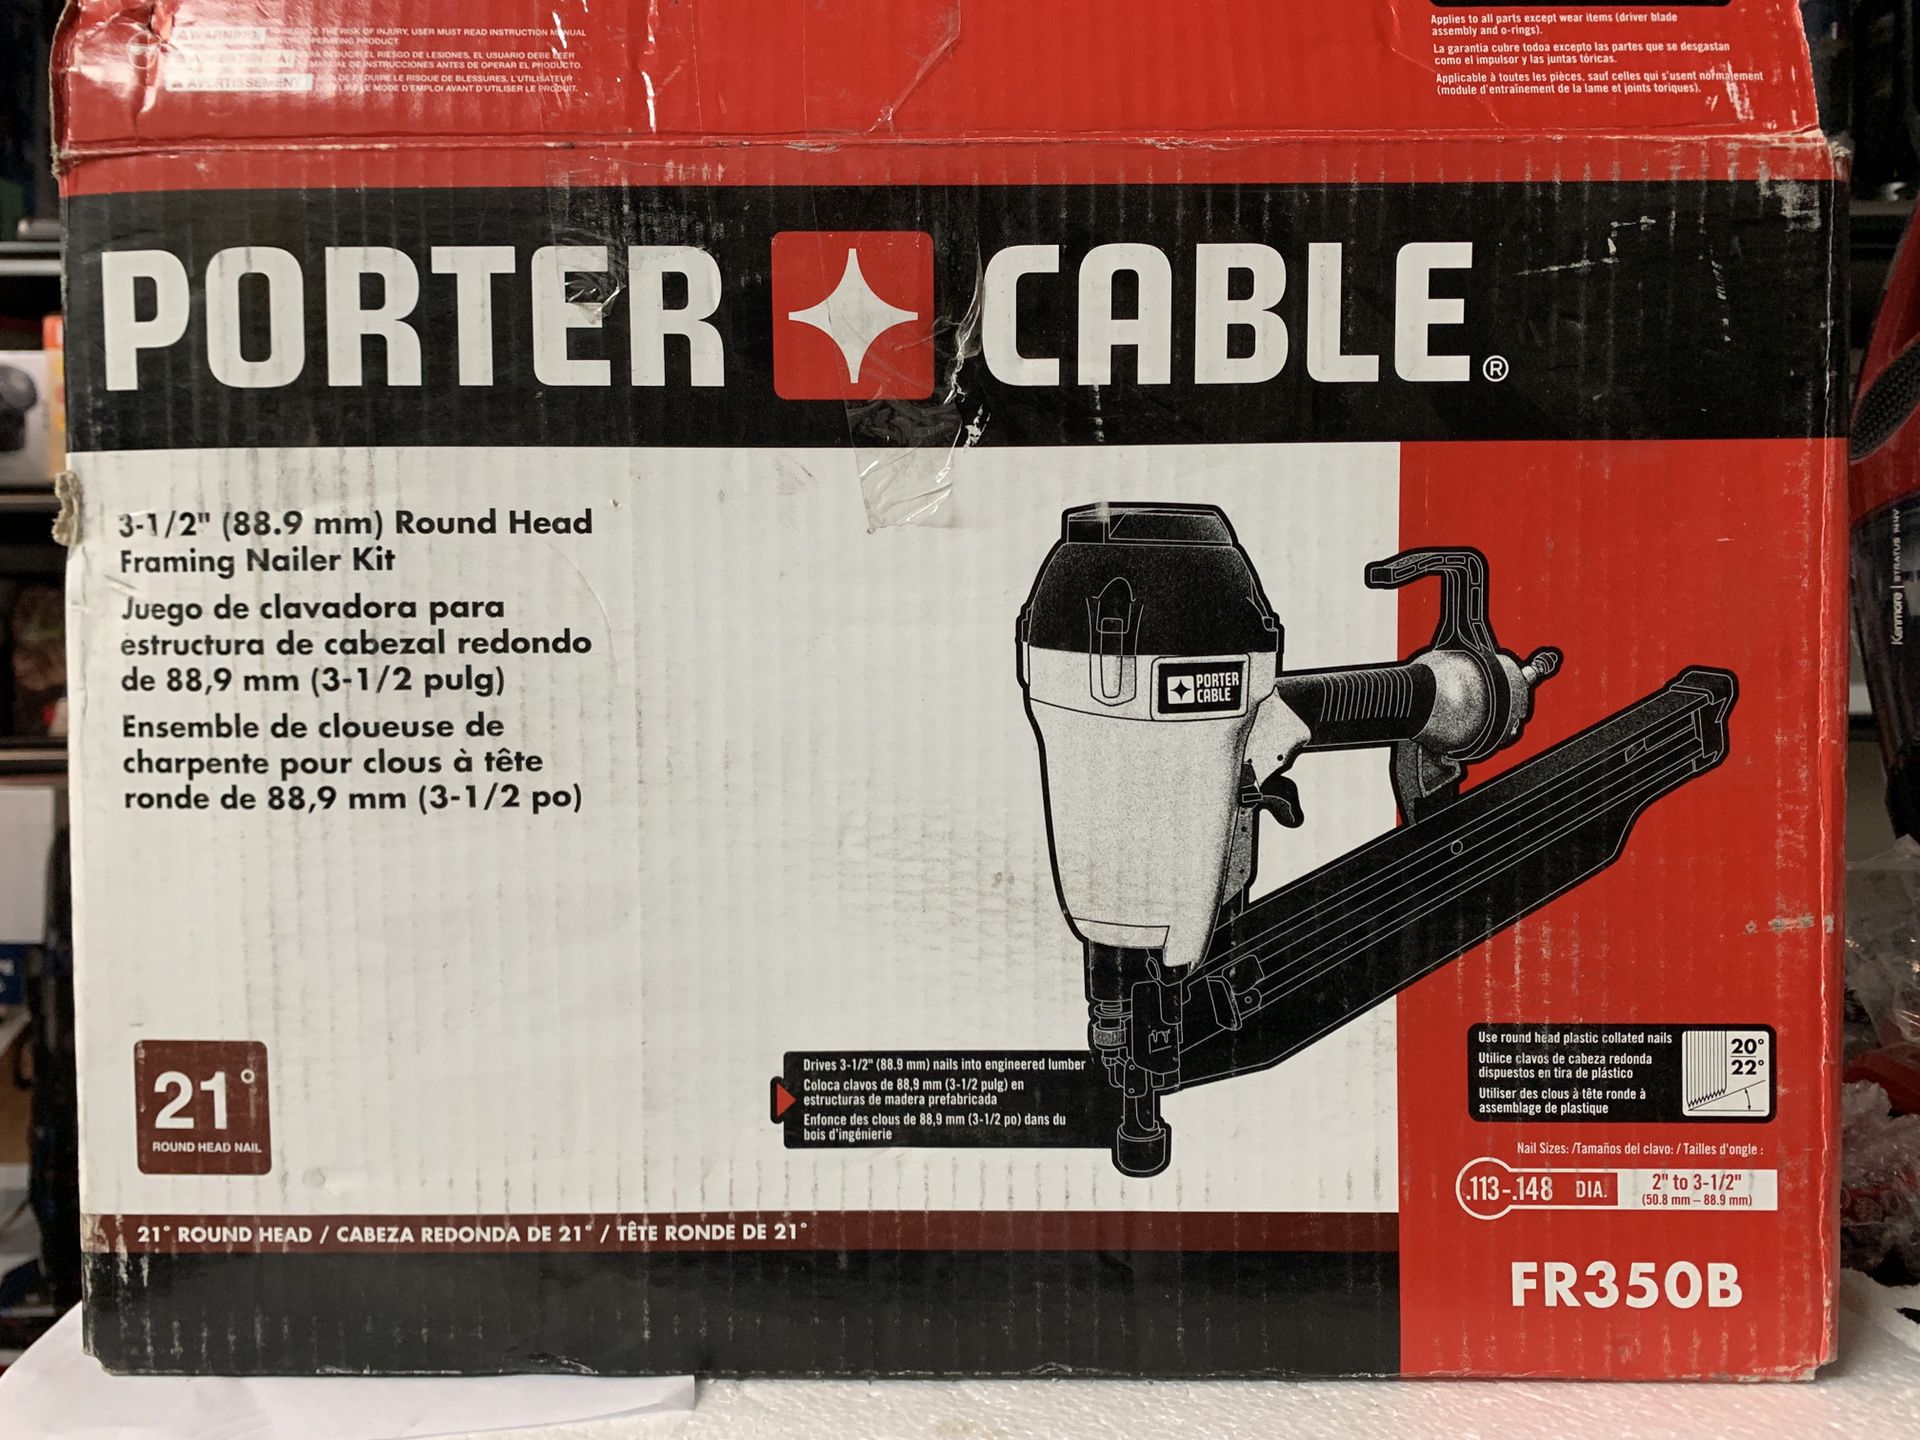 Porter canble round head framing nailer kit 3-1/2 (88.9mm)